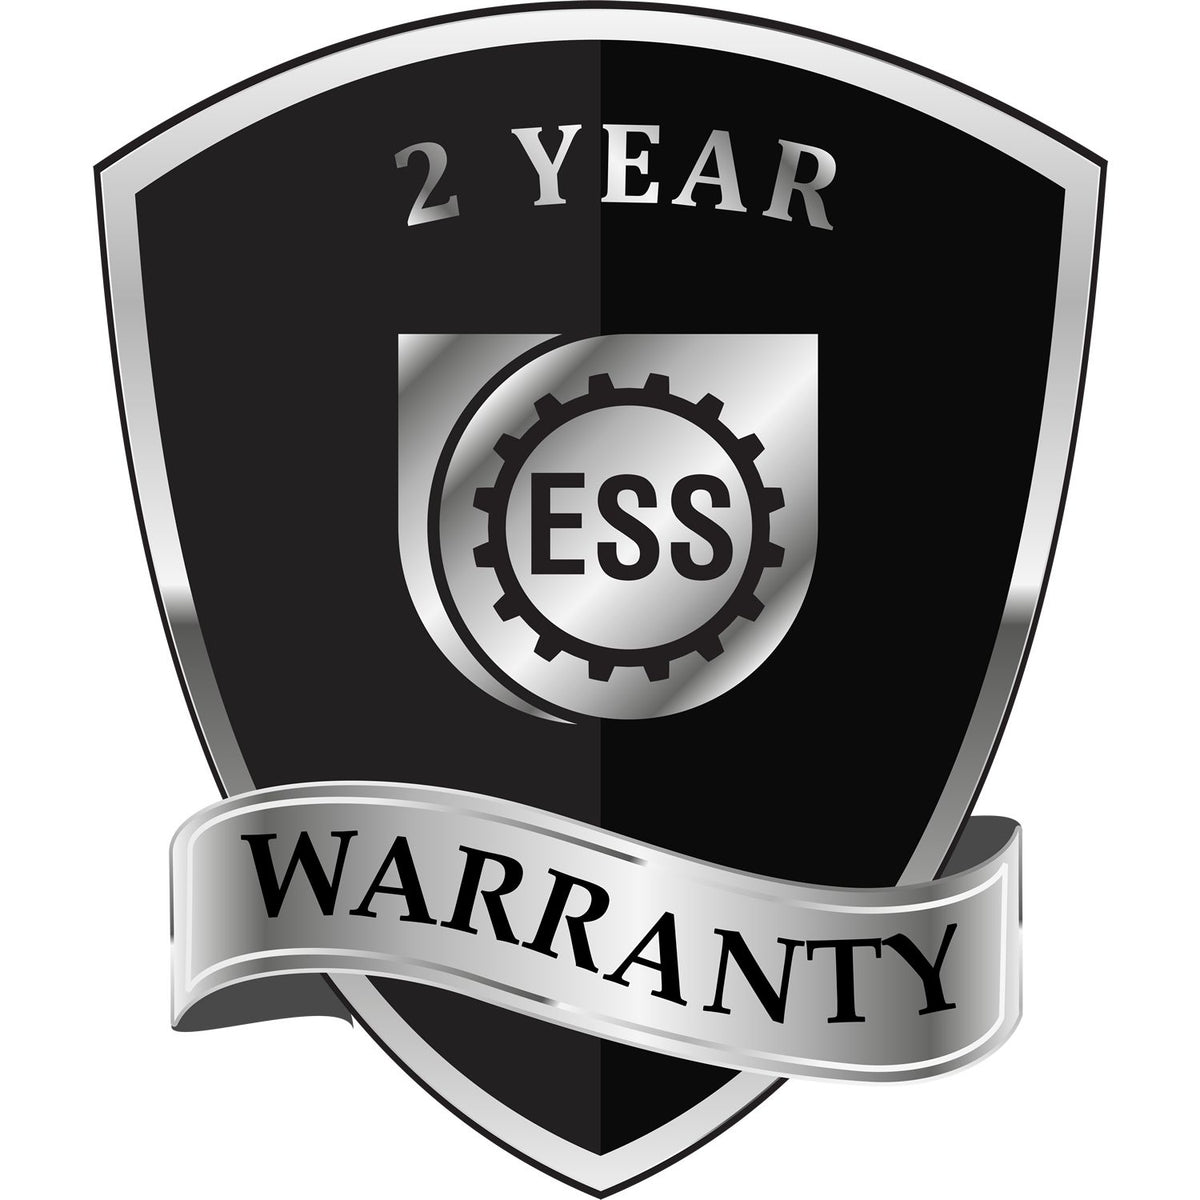 A black and silver badge or emblem showing warranty information for the State of Nebraska Extended Long Reach Geologist Seal